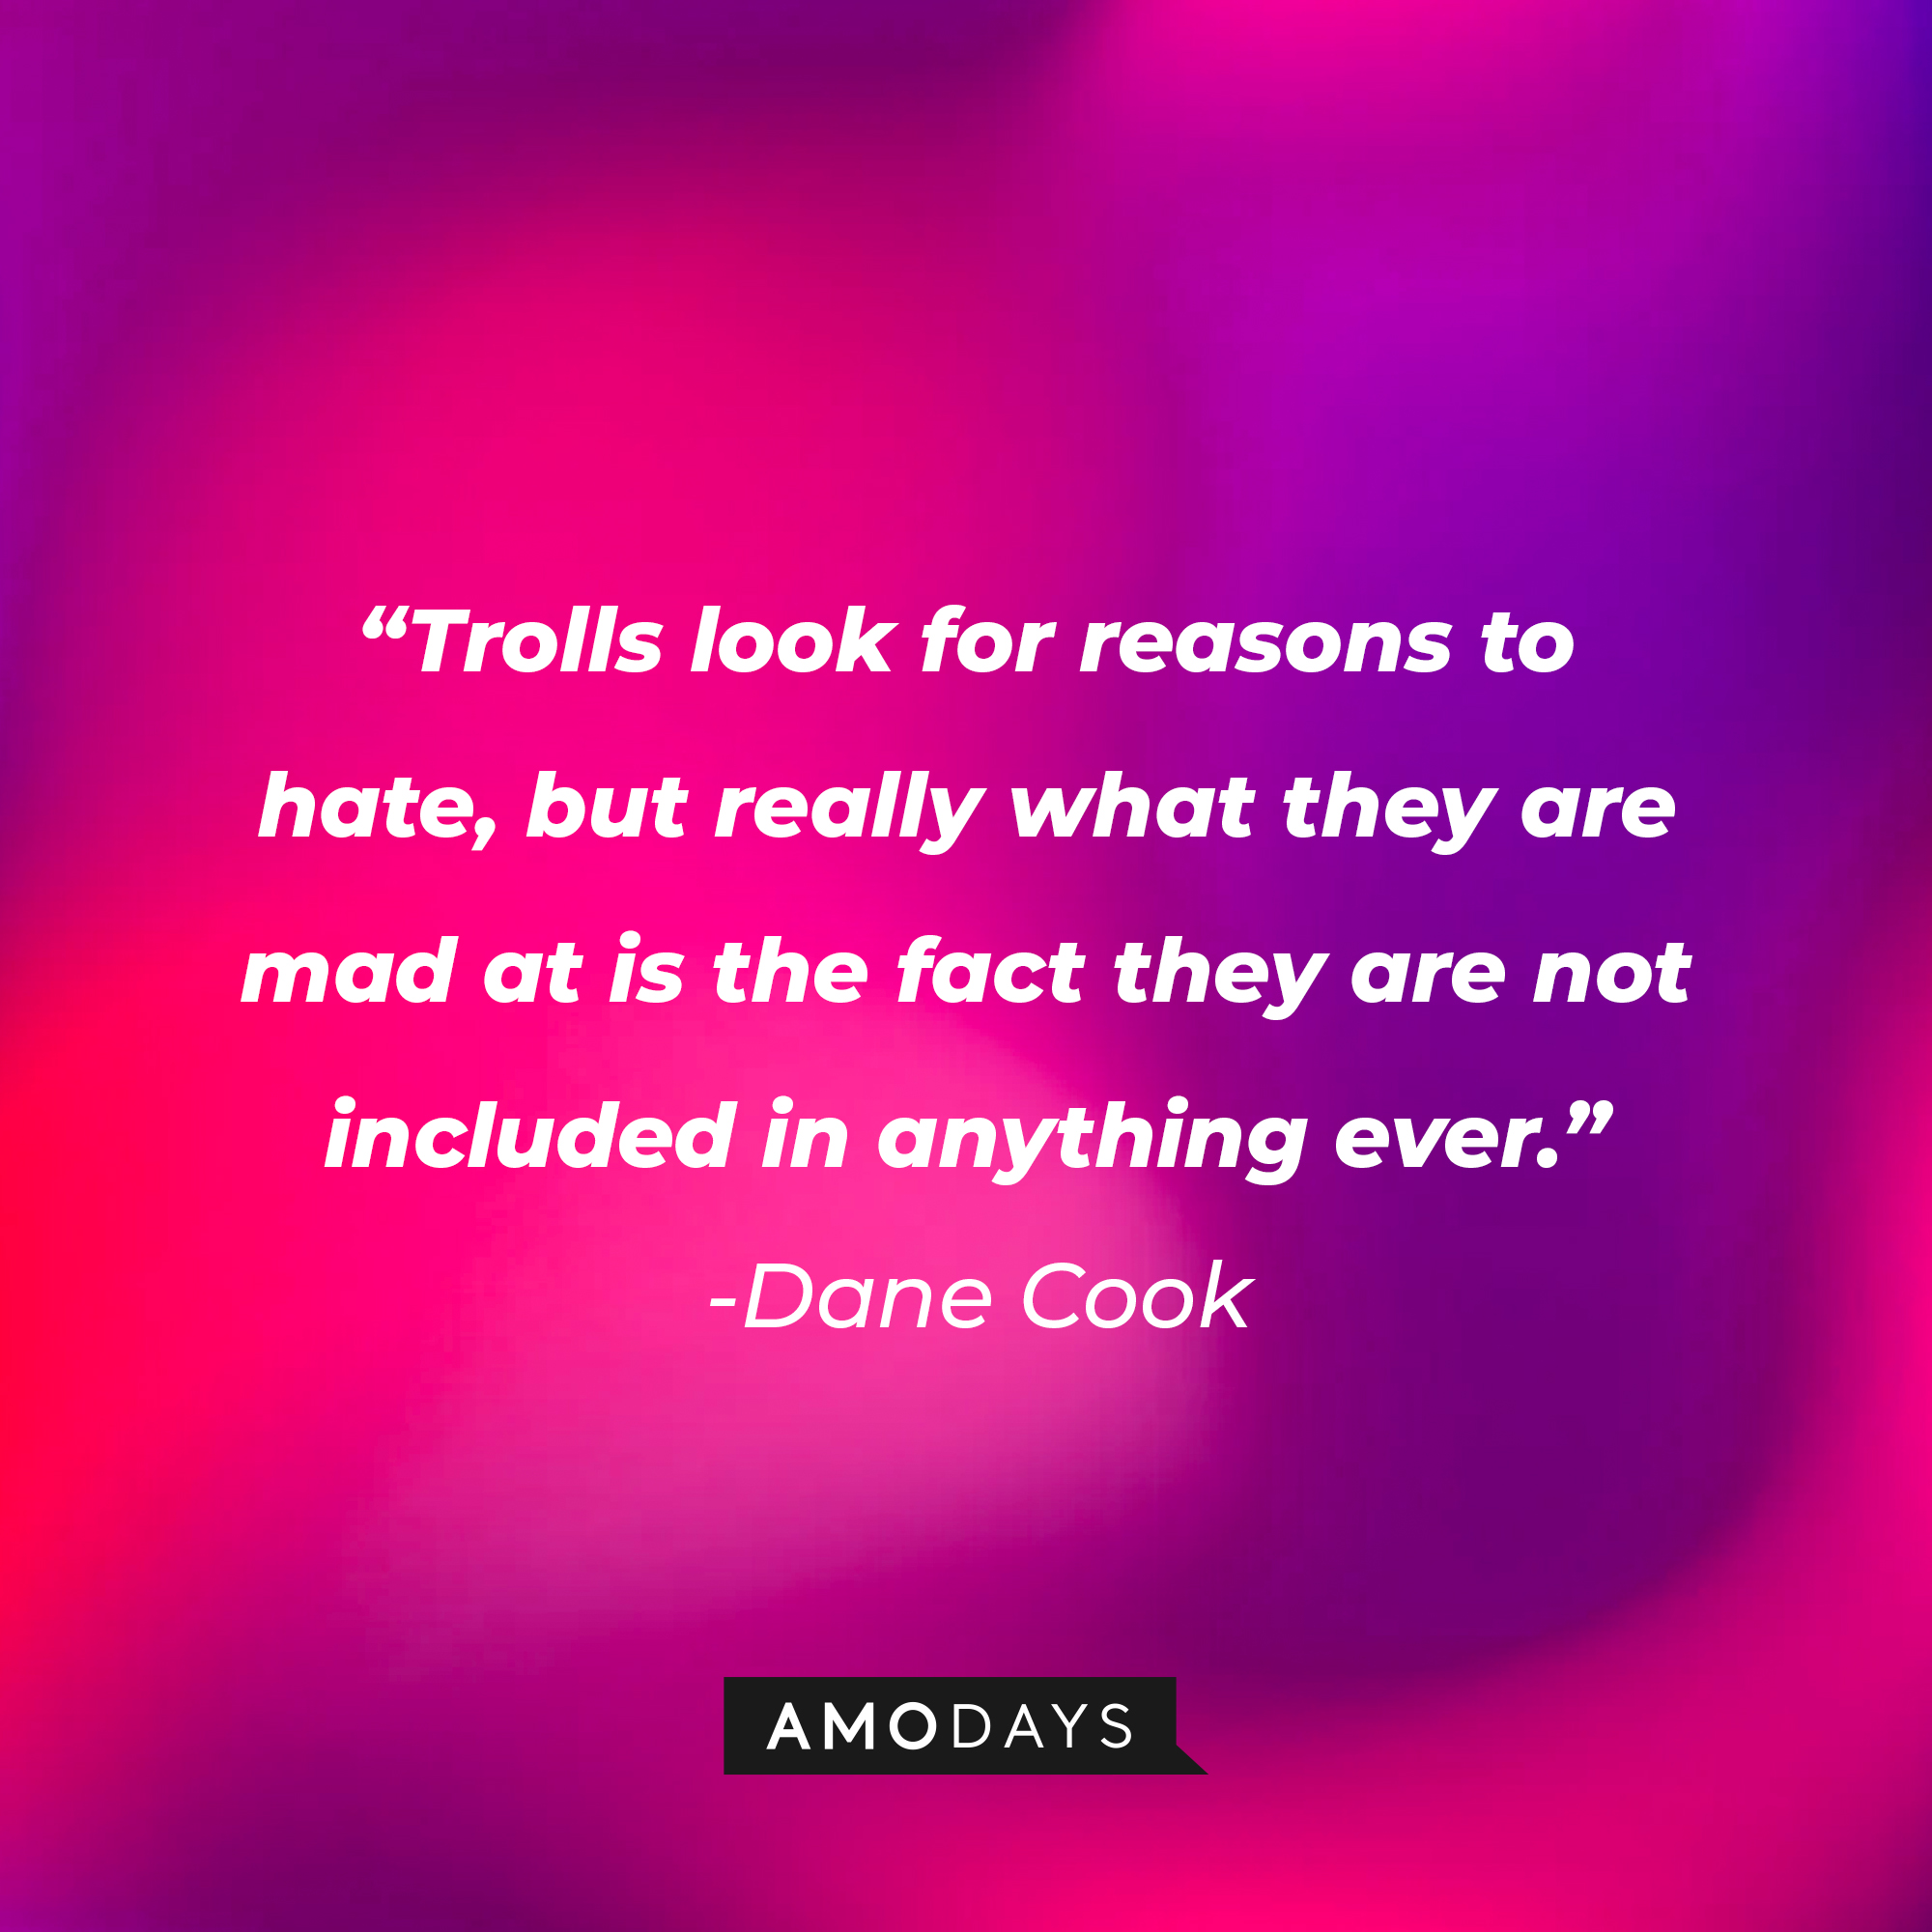 Dane Cook's quote: “Trolls look for reasons to hate, but really what they are mad at is the fact they are not included in anything ever.” | Source: Amodays